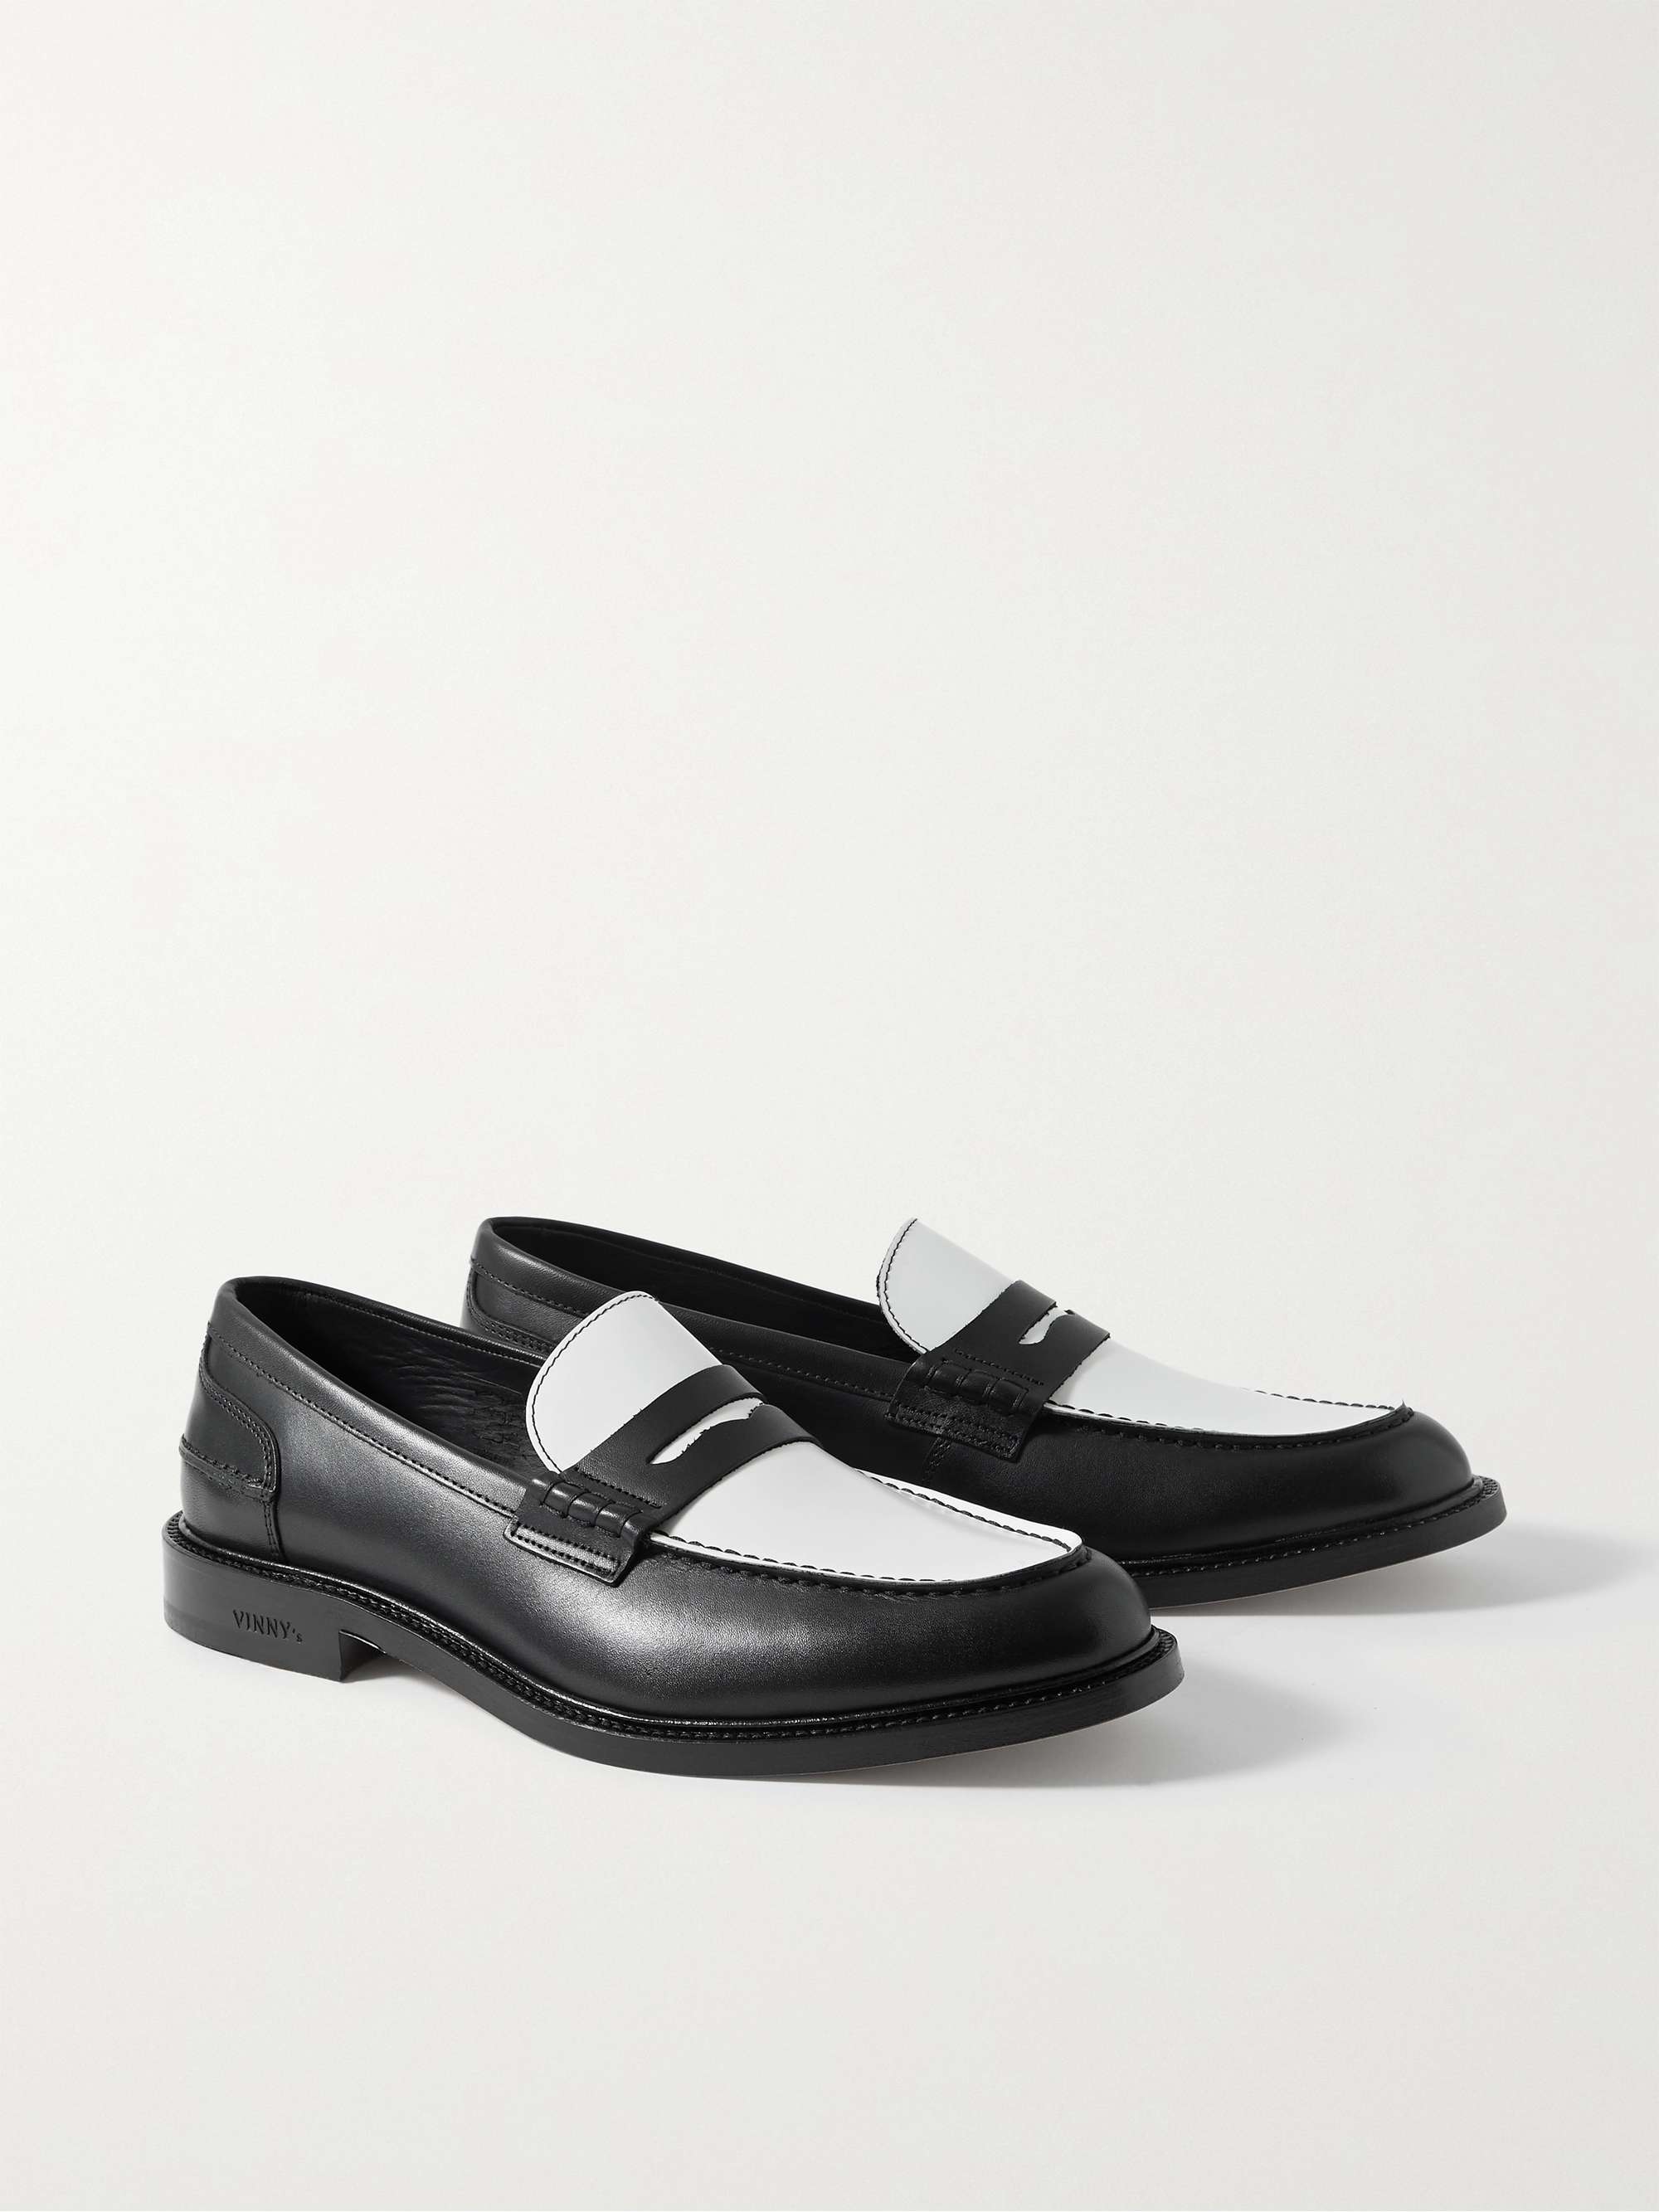 VINNY'S Townee Two-Tone Leather Penny Loafers